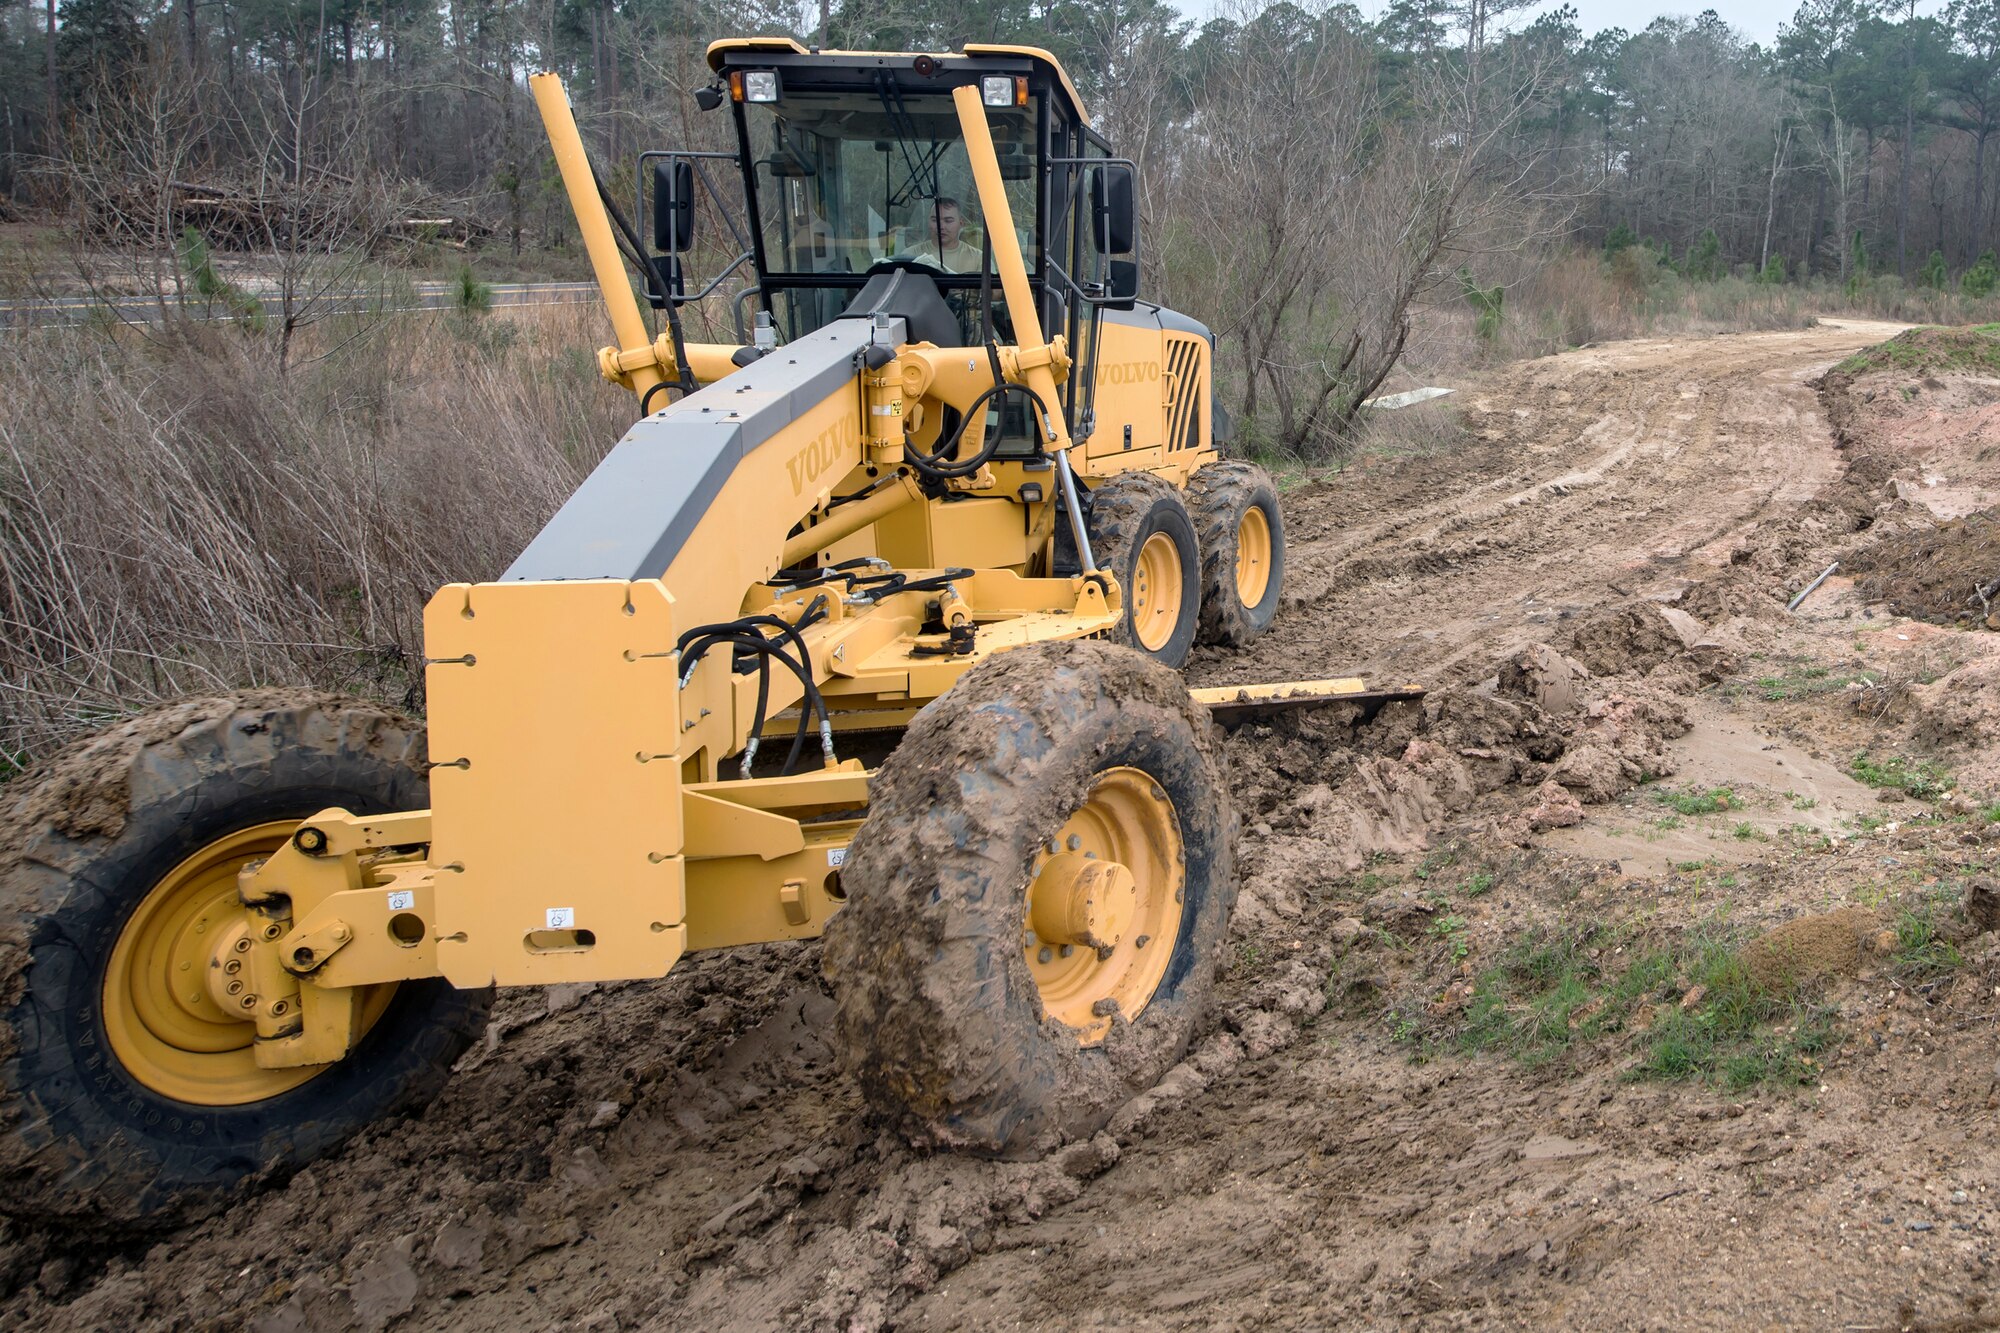 Staff Sgt. Elliot Westerman, 23d Civil Engineer Squadron (CES) heavy equipment operator, pushes dirt with a grader, Feb. 15, 2018, at Moody Air Force Base, Ga. Airmen from the 23d CES participated in a Prime Base Engineer Emergency Force training day to prepare for some of the wartime tasks they could encounter while in a deployed environment. (U.S. Air Force photo by Airman Eugene Oliver)